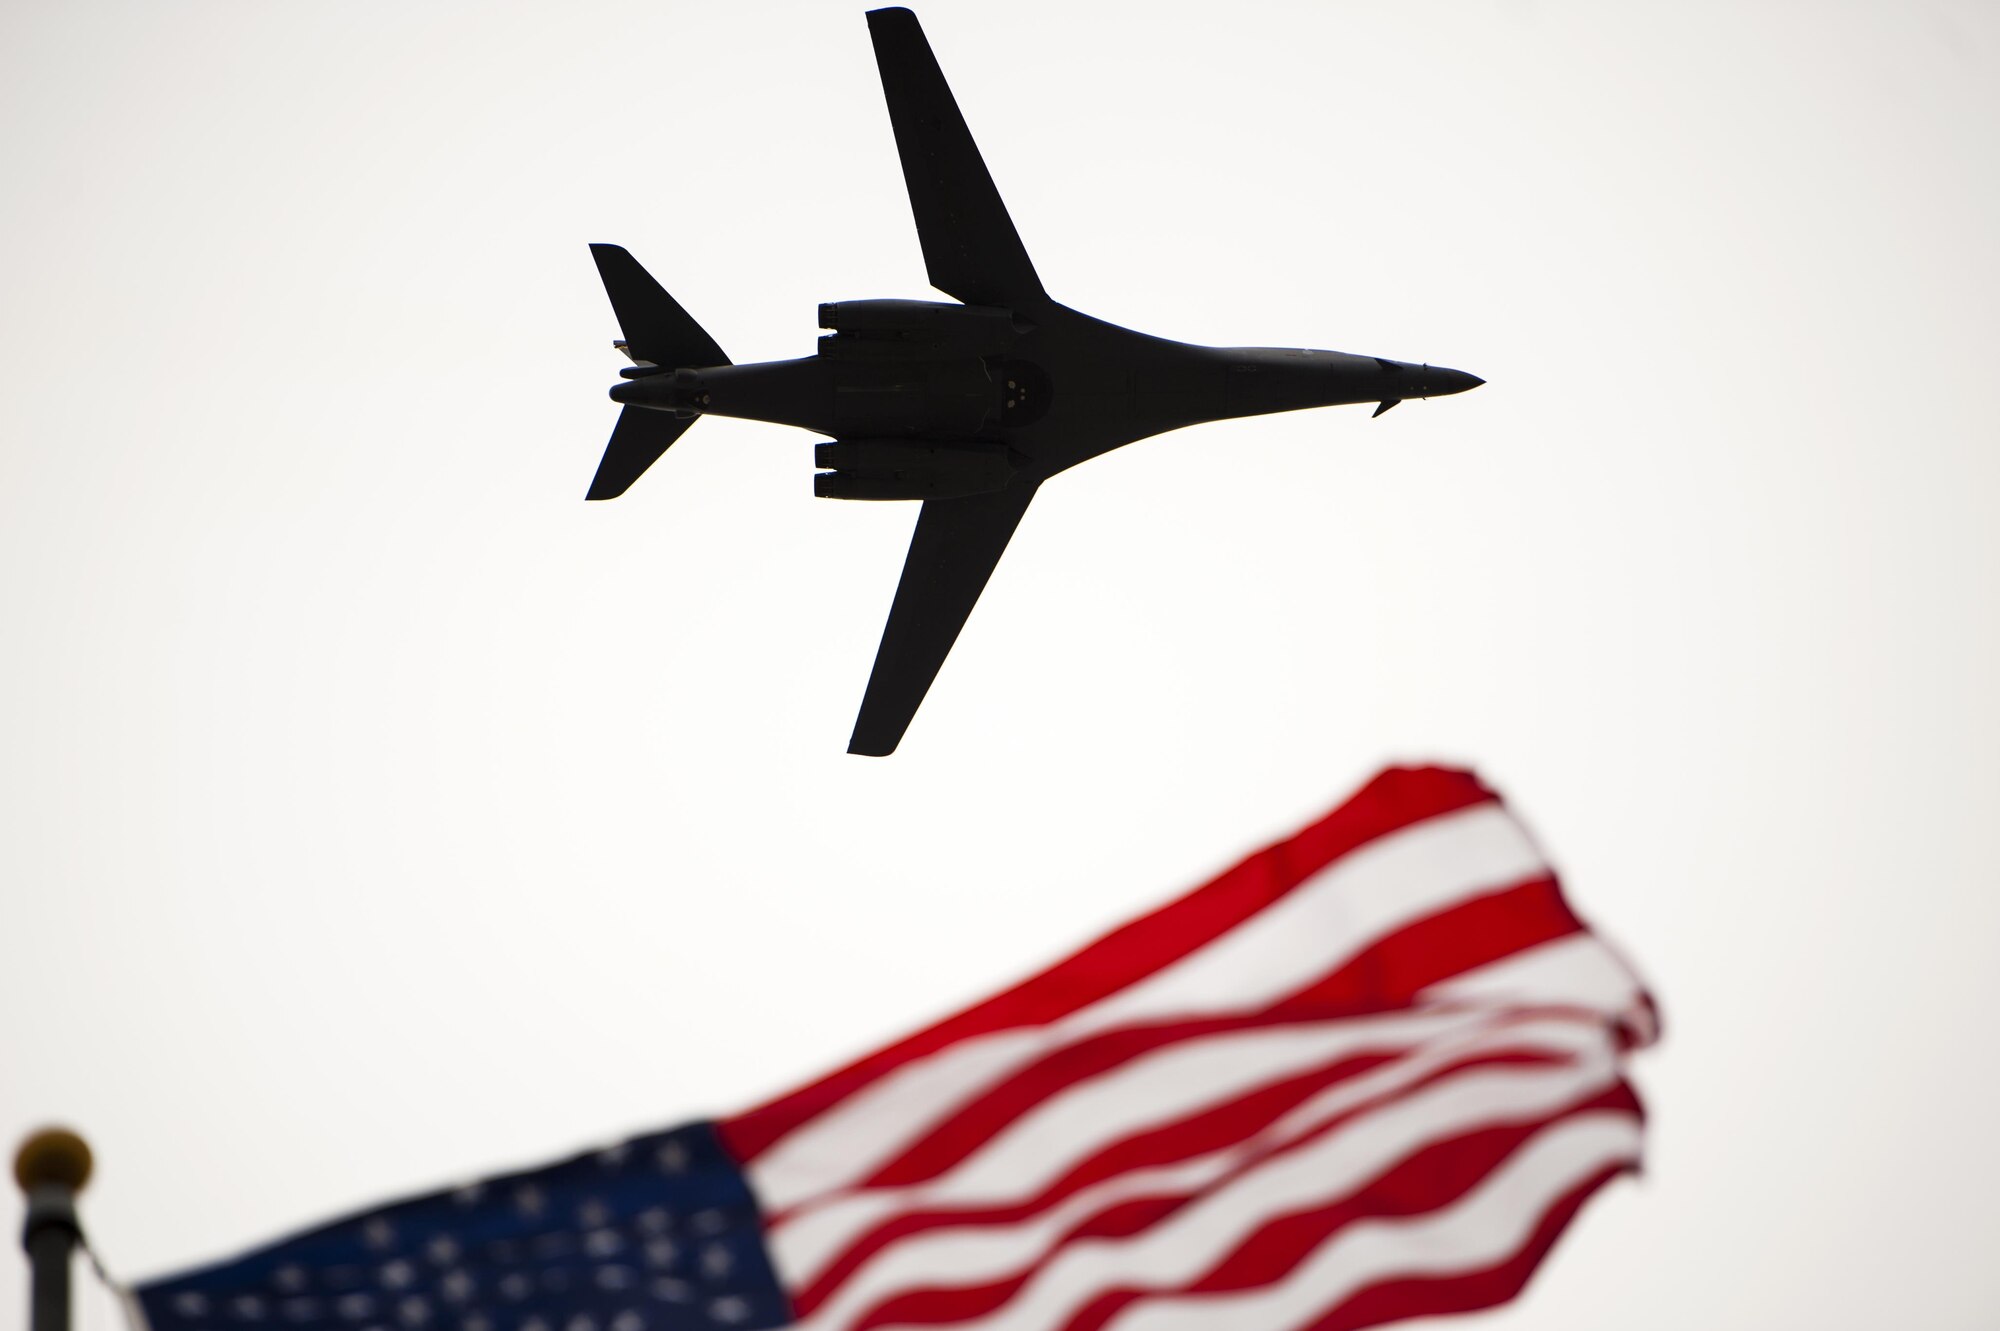 A B-1 Lancer flies over the Norma Brown building during the 75th Diamond Anniversary ceremony on Goodfellow Air Force Base, Texas, Jan. 26, 2016. The B-1 flew over after a Vultee BT-15 Valient flew over. Both were symbolic; the vintage BT-15 represented the planes that Goodfellow pilots trained on, and the B-1 represented the intelligence support training the base now provides. (U.S. Air Force photo/Senior Airman Scott Jackson)